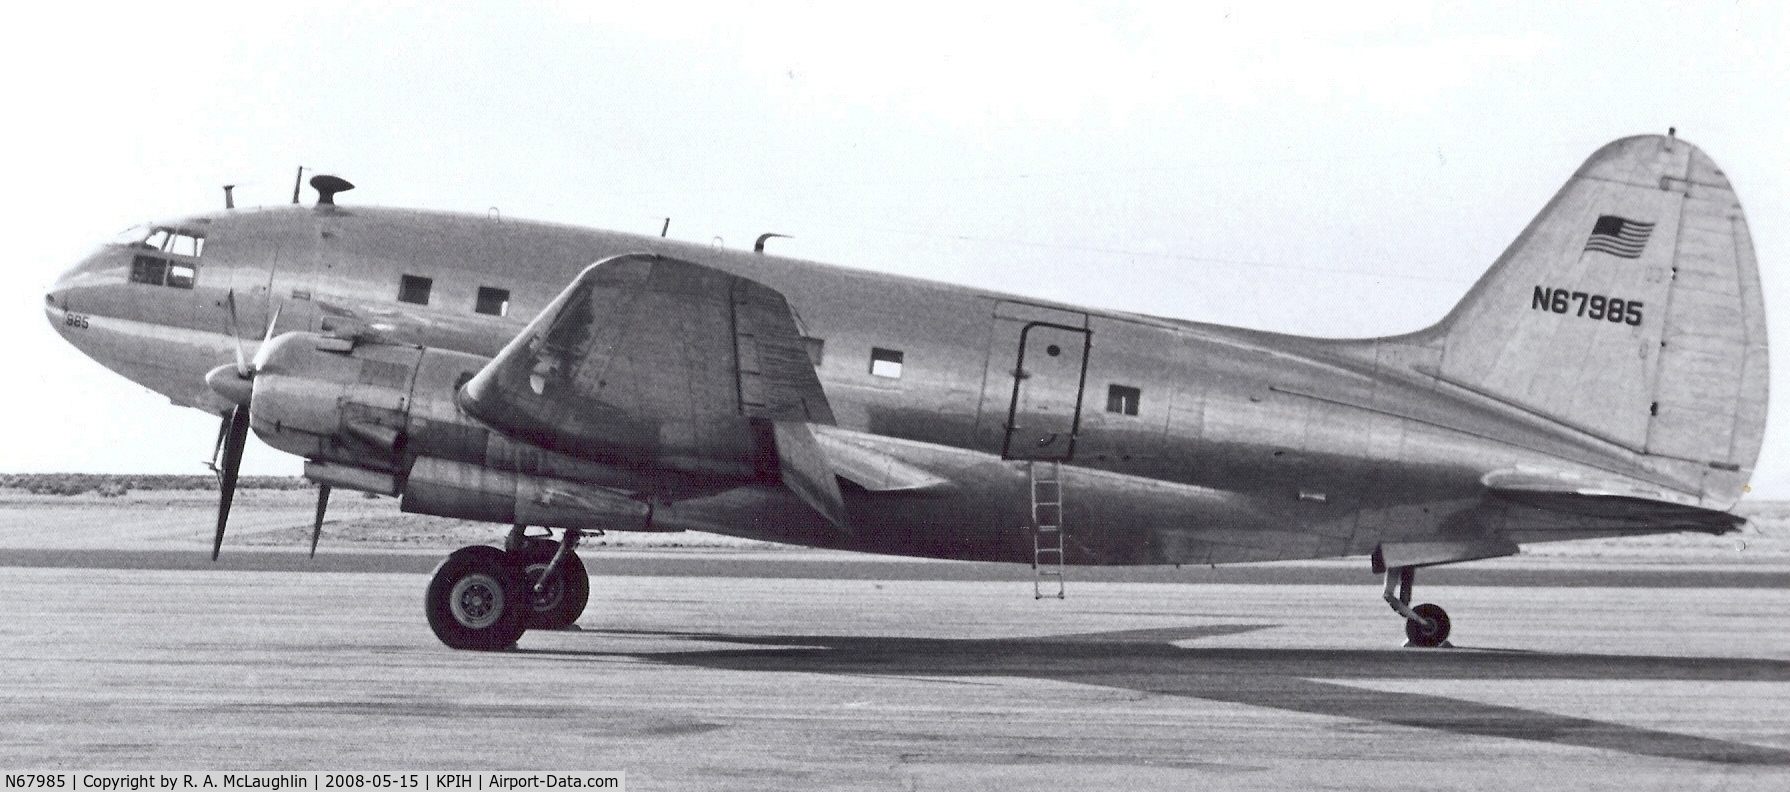 N67985, Curtiss C-46 Commando C/N 22538, Private owner, APR '78
Air America lettering visible on right side where removed.